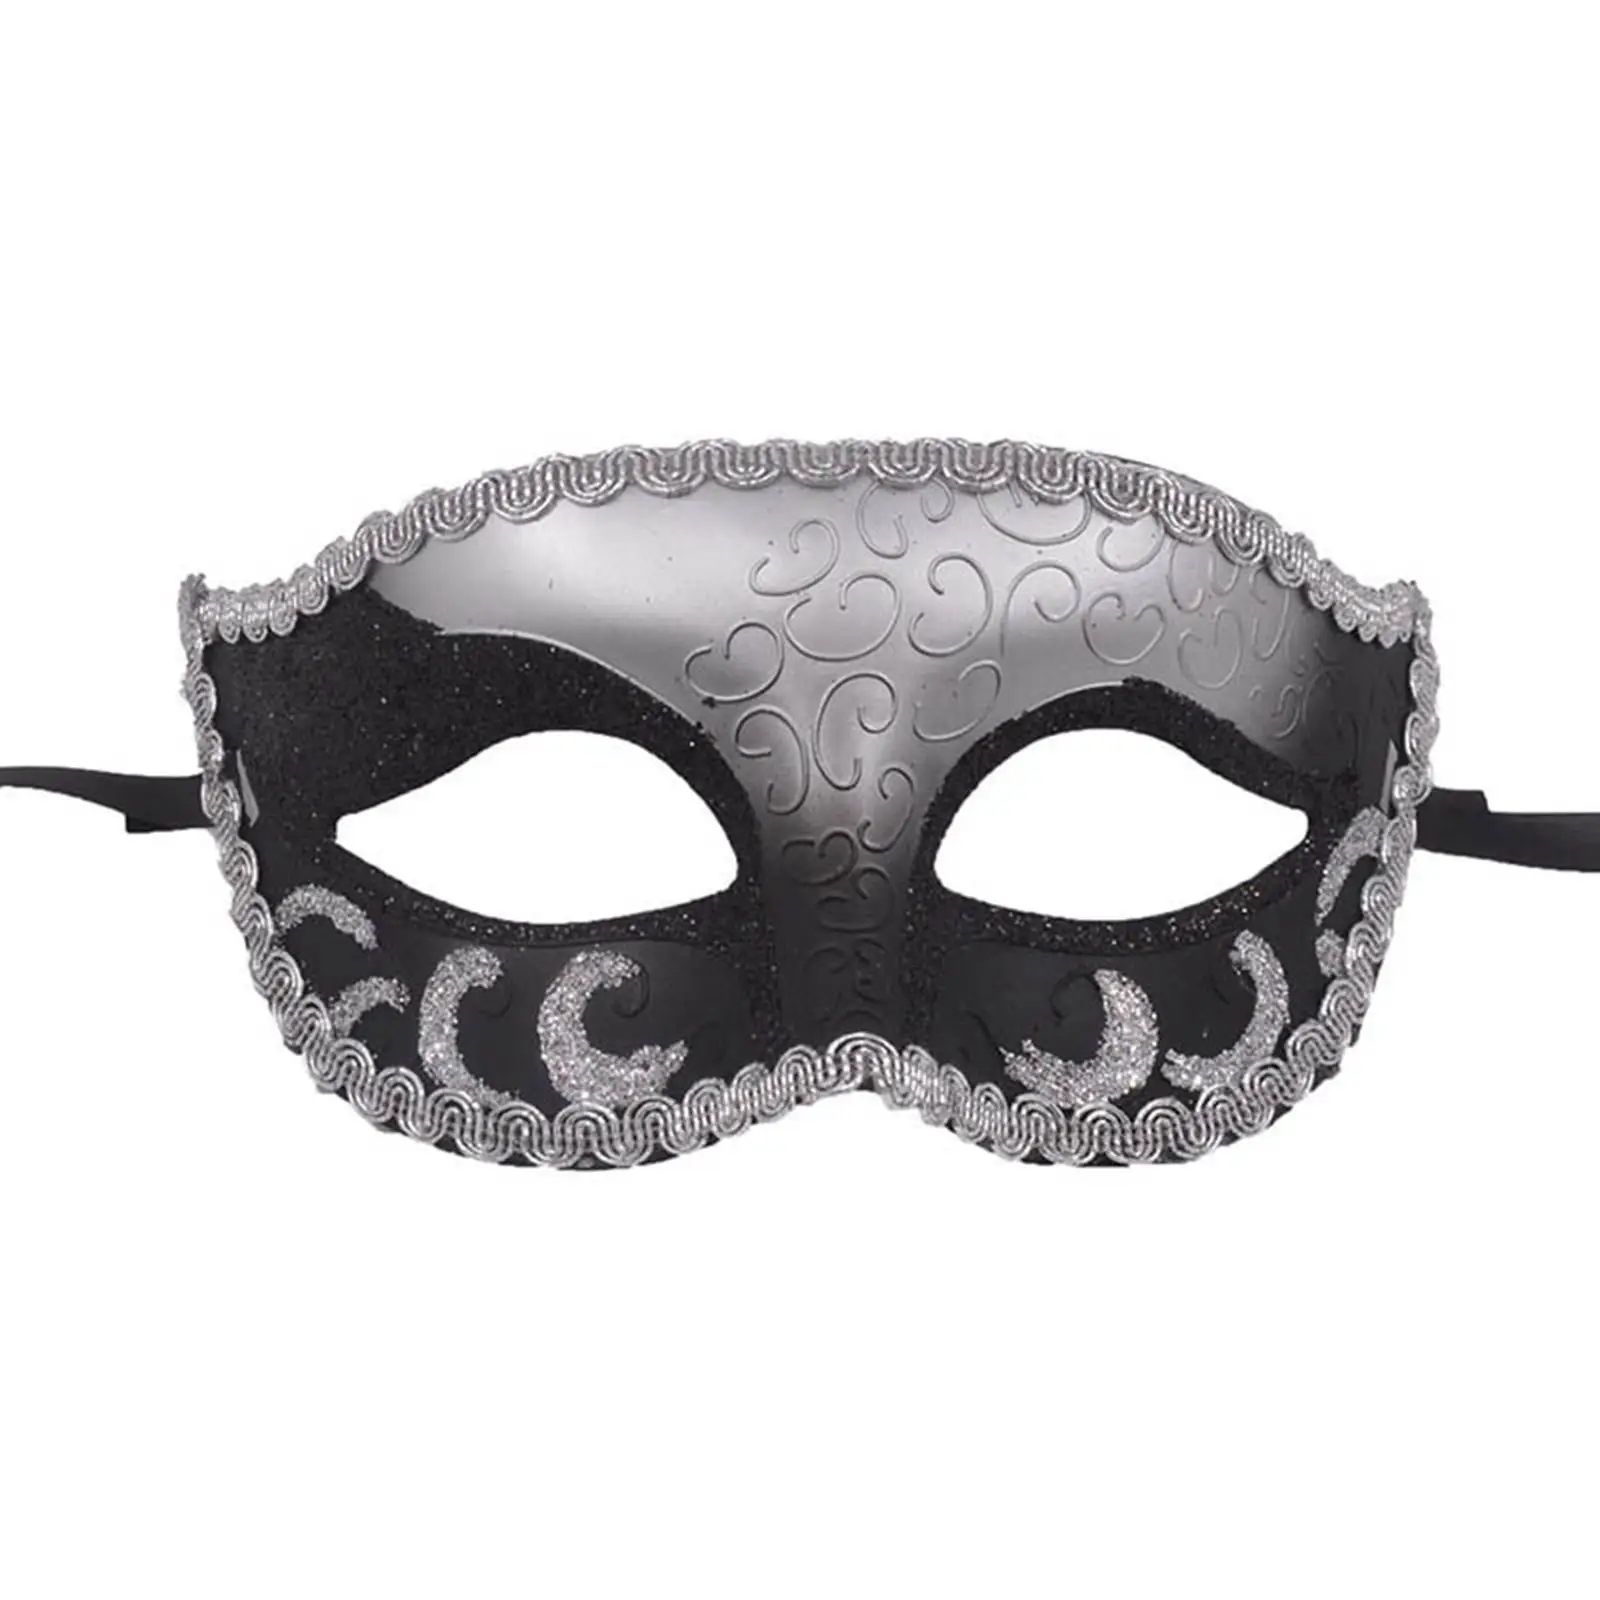  Half   Cosplay Costume Masquerade Ball  for Party